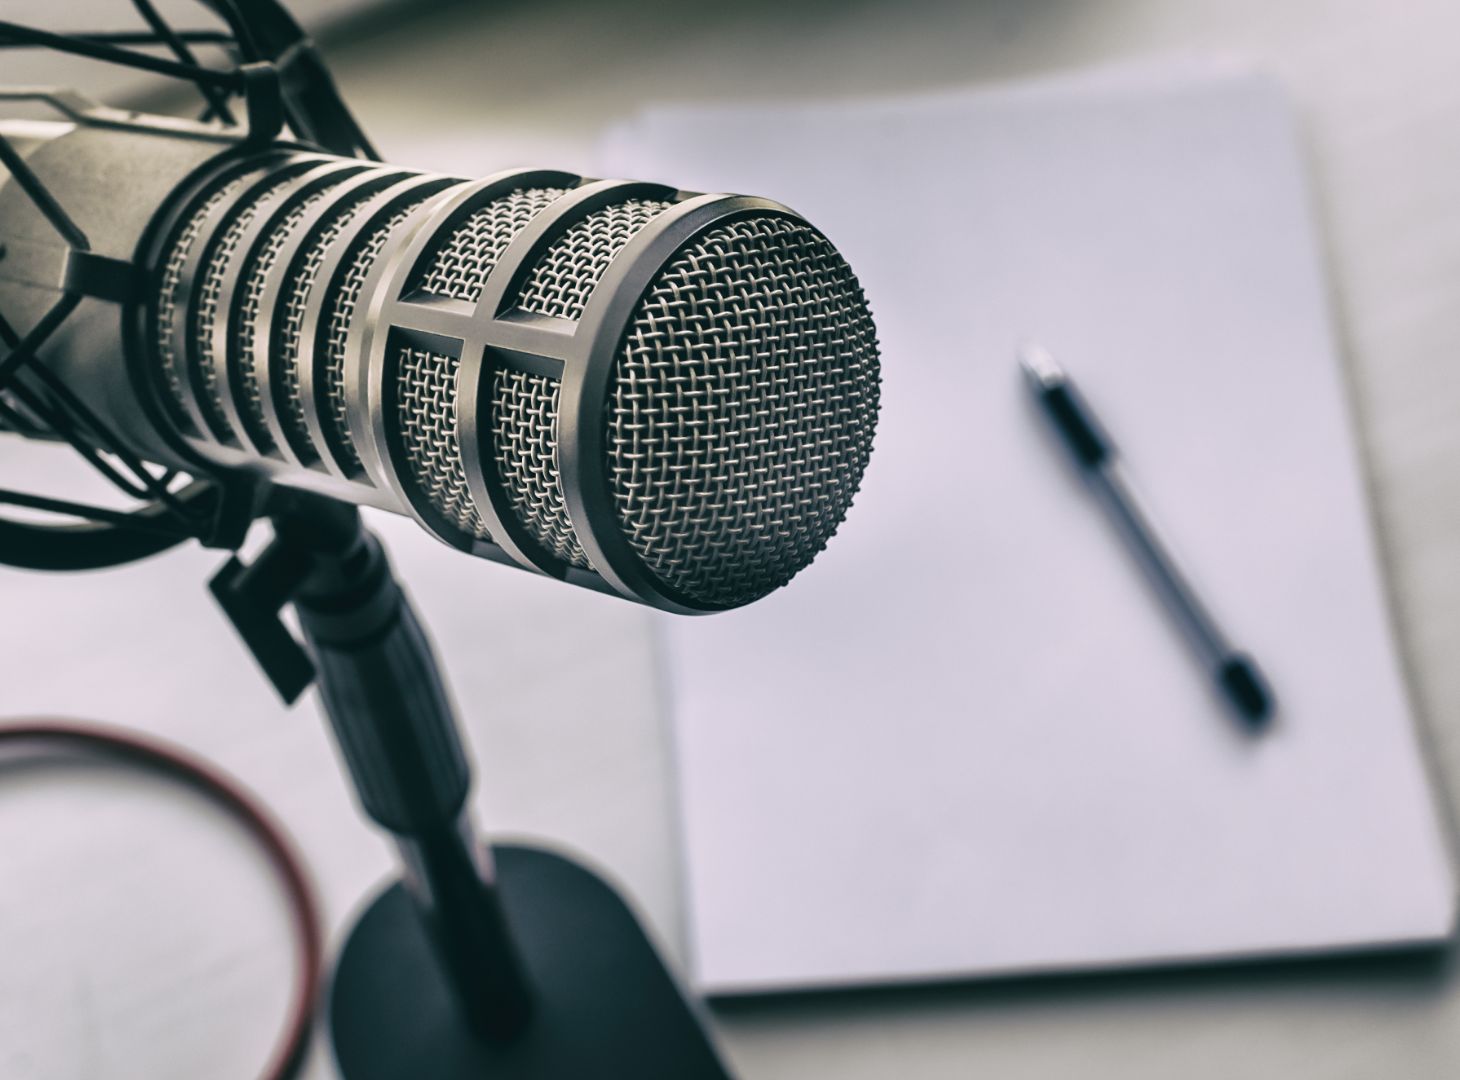 Image of a microphone on a table next to a pen and paper